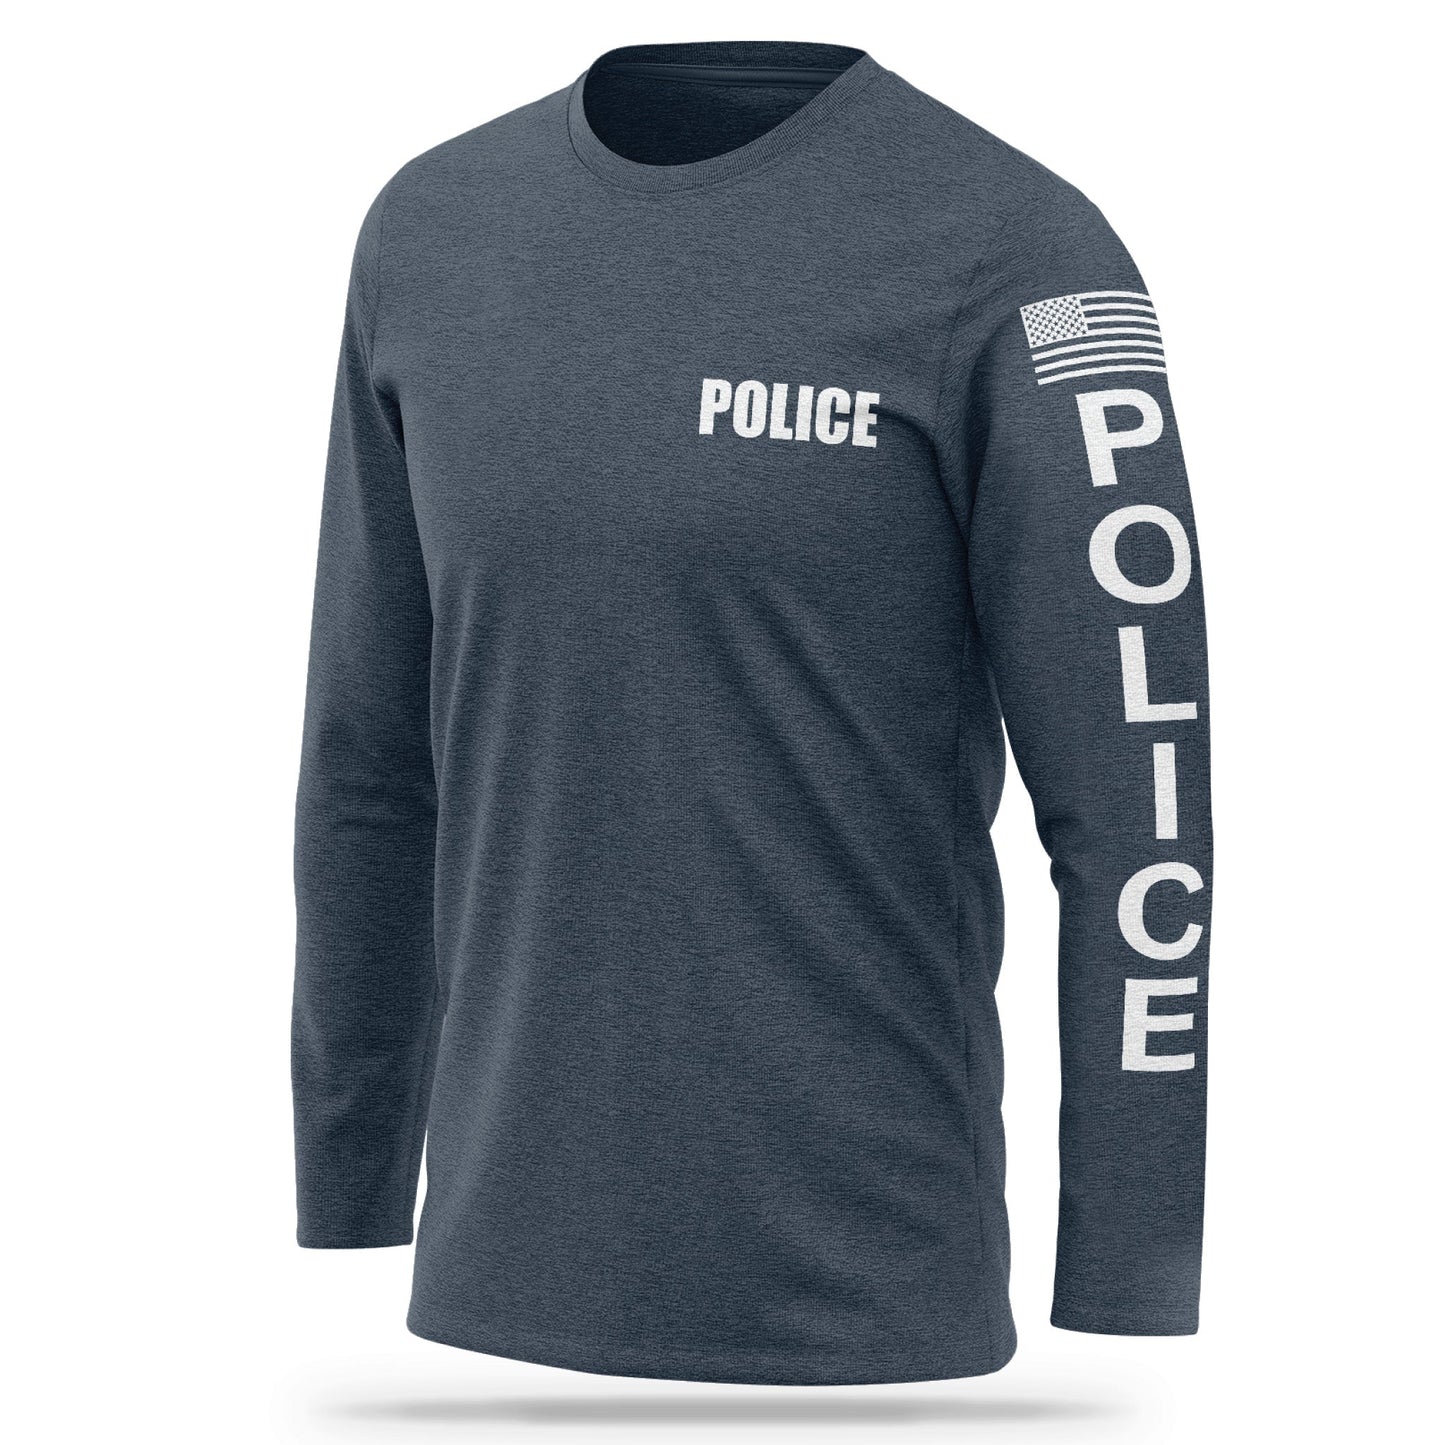 [POLICE] Cotton Blend Long Sleeve [NVY/WHT]-13 Fifty Apparel